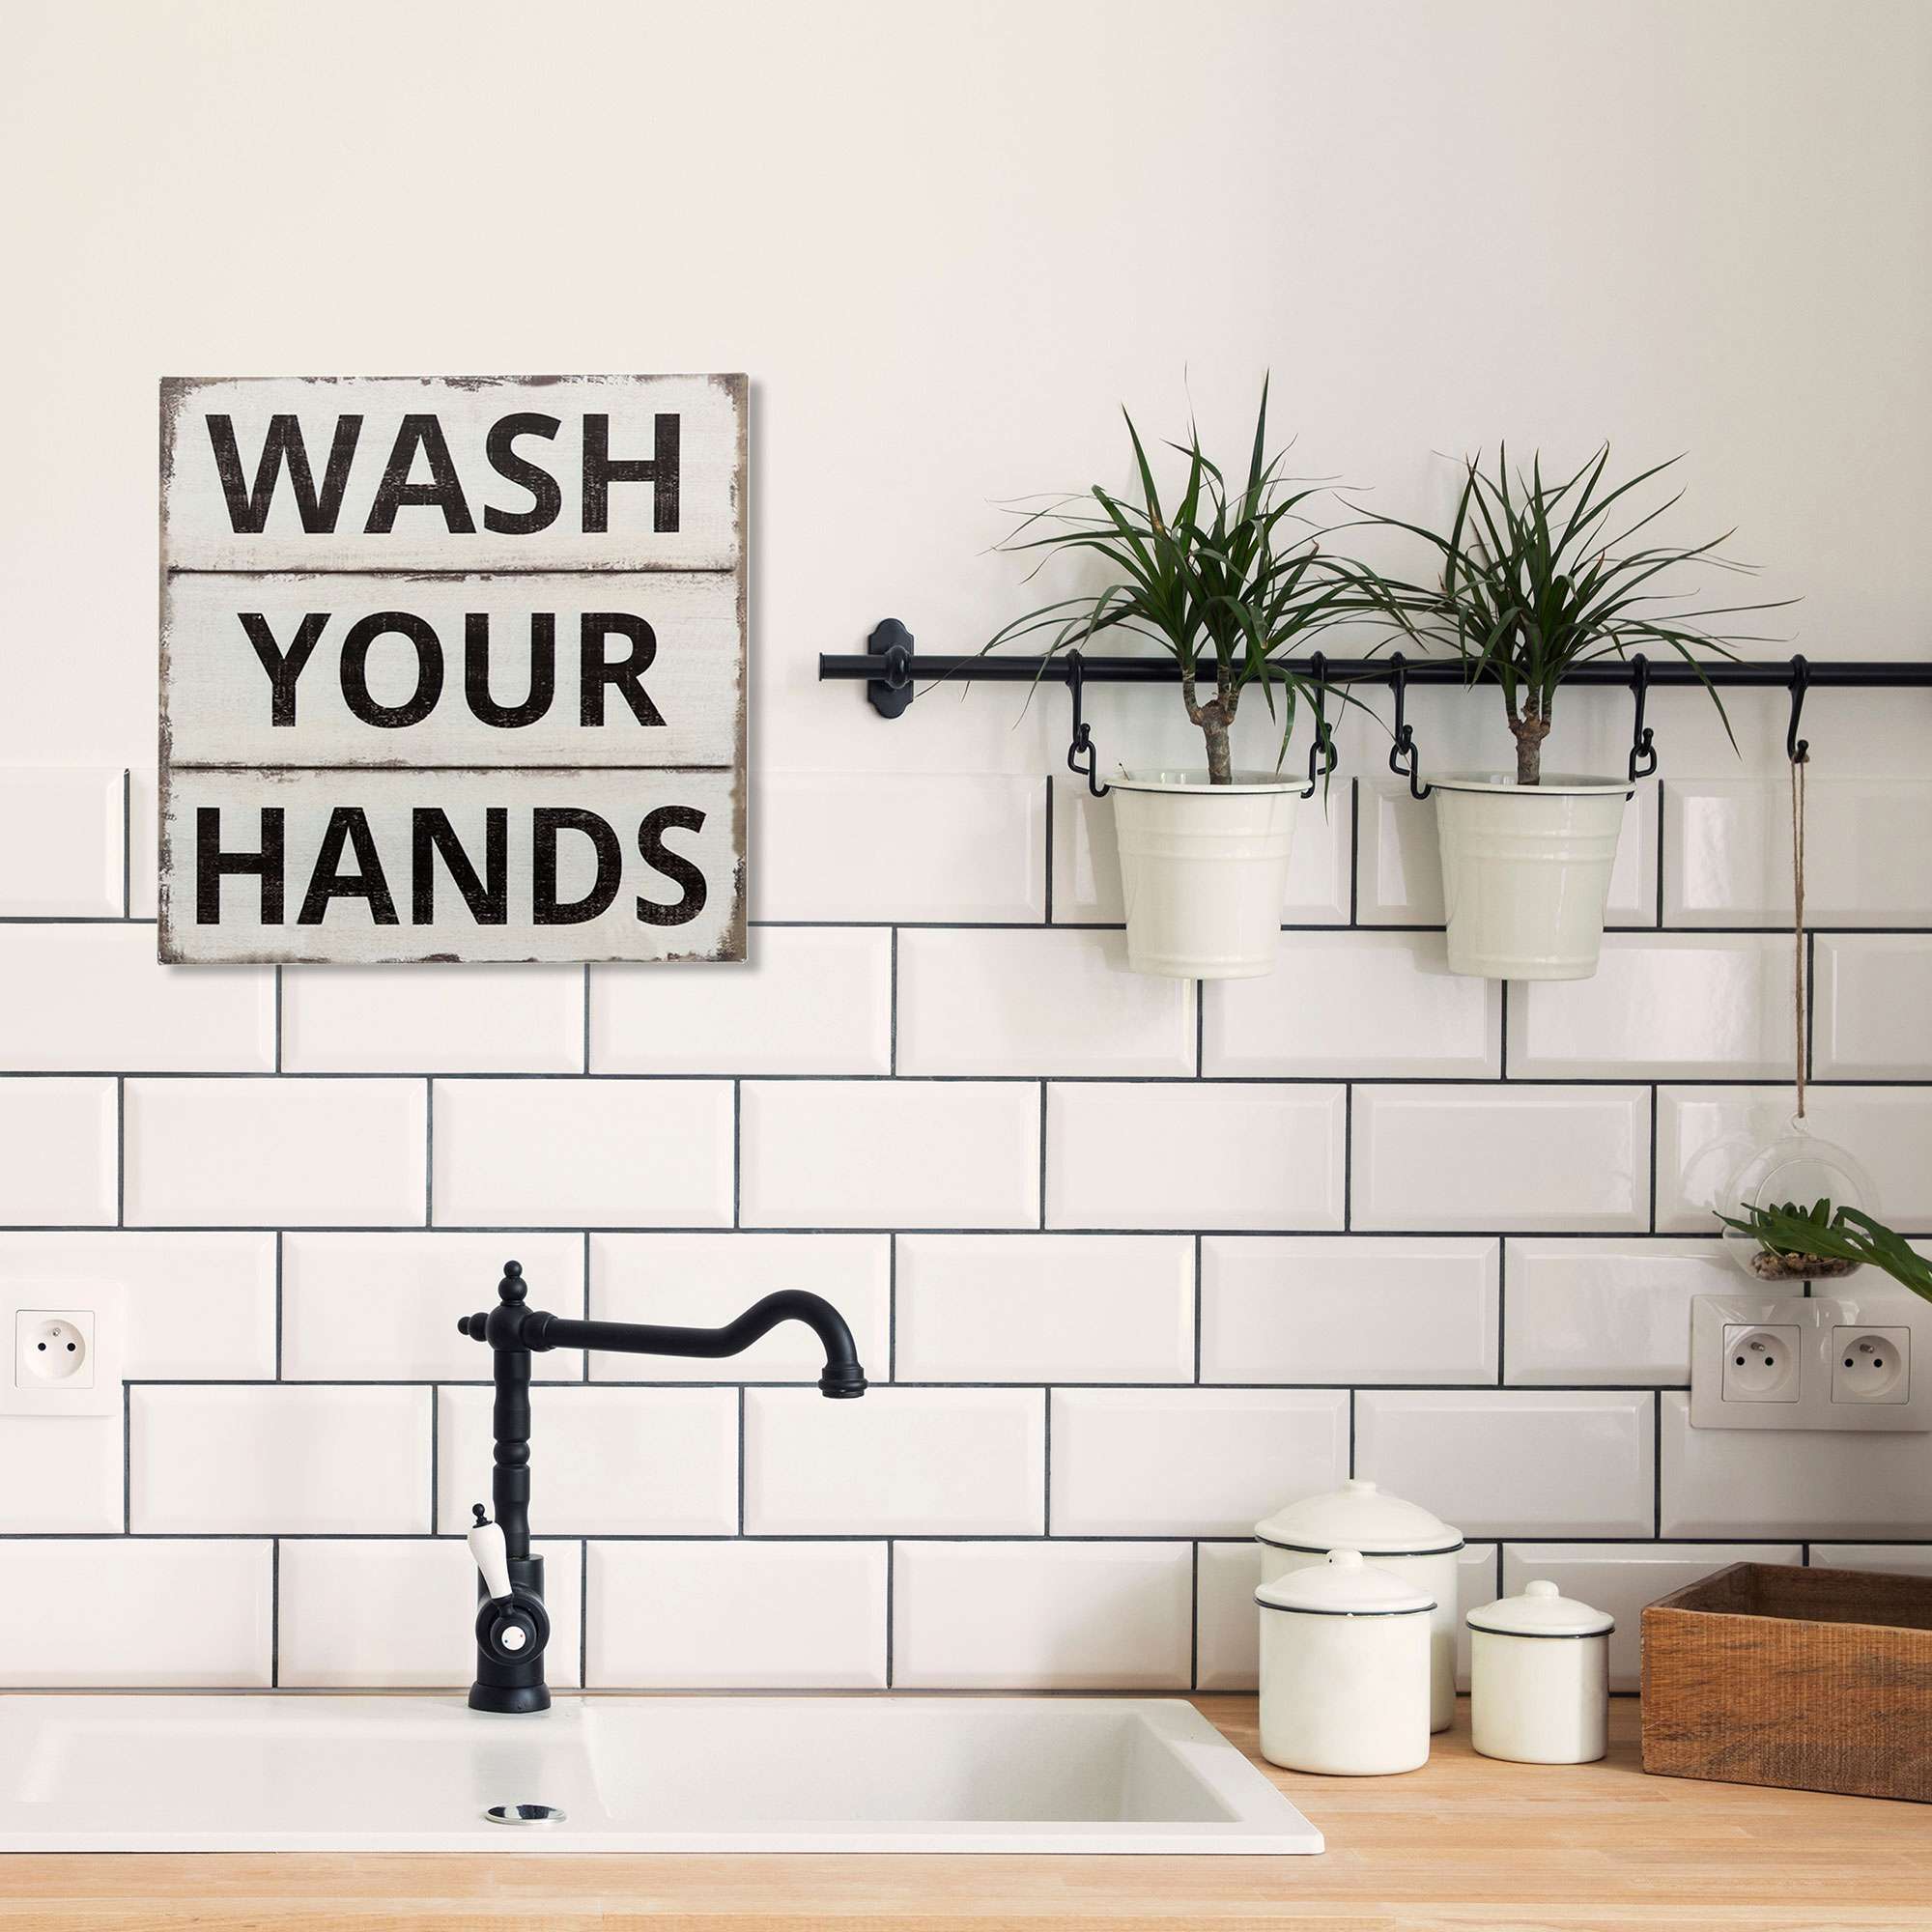 Barnyard Designs Wash Your Hands Sign Primitive Country Farmhouse Bathroom Quotes Home Decor Sign 11” x 11” - image 2 of 7